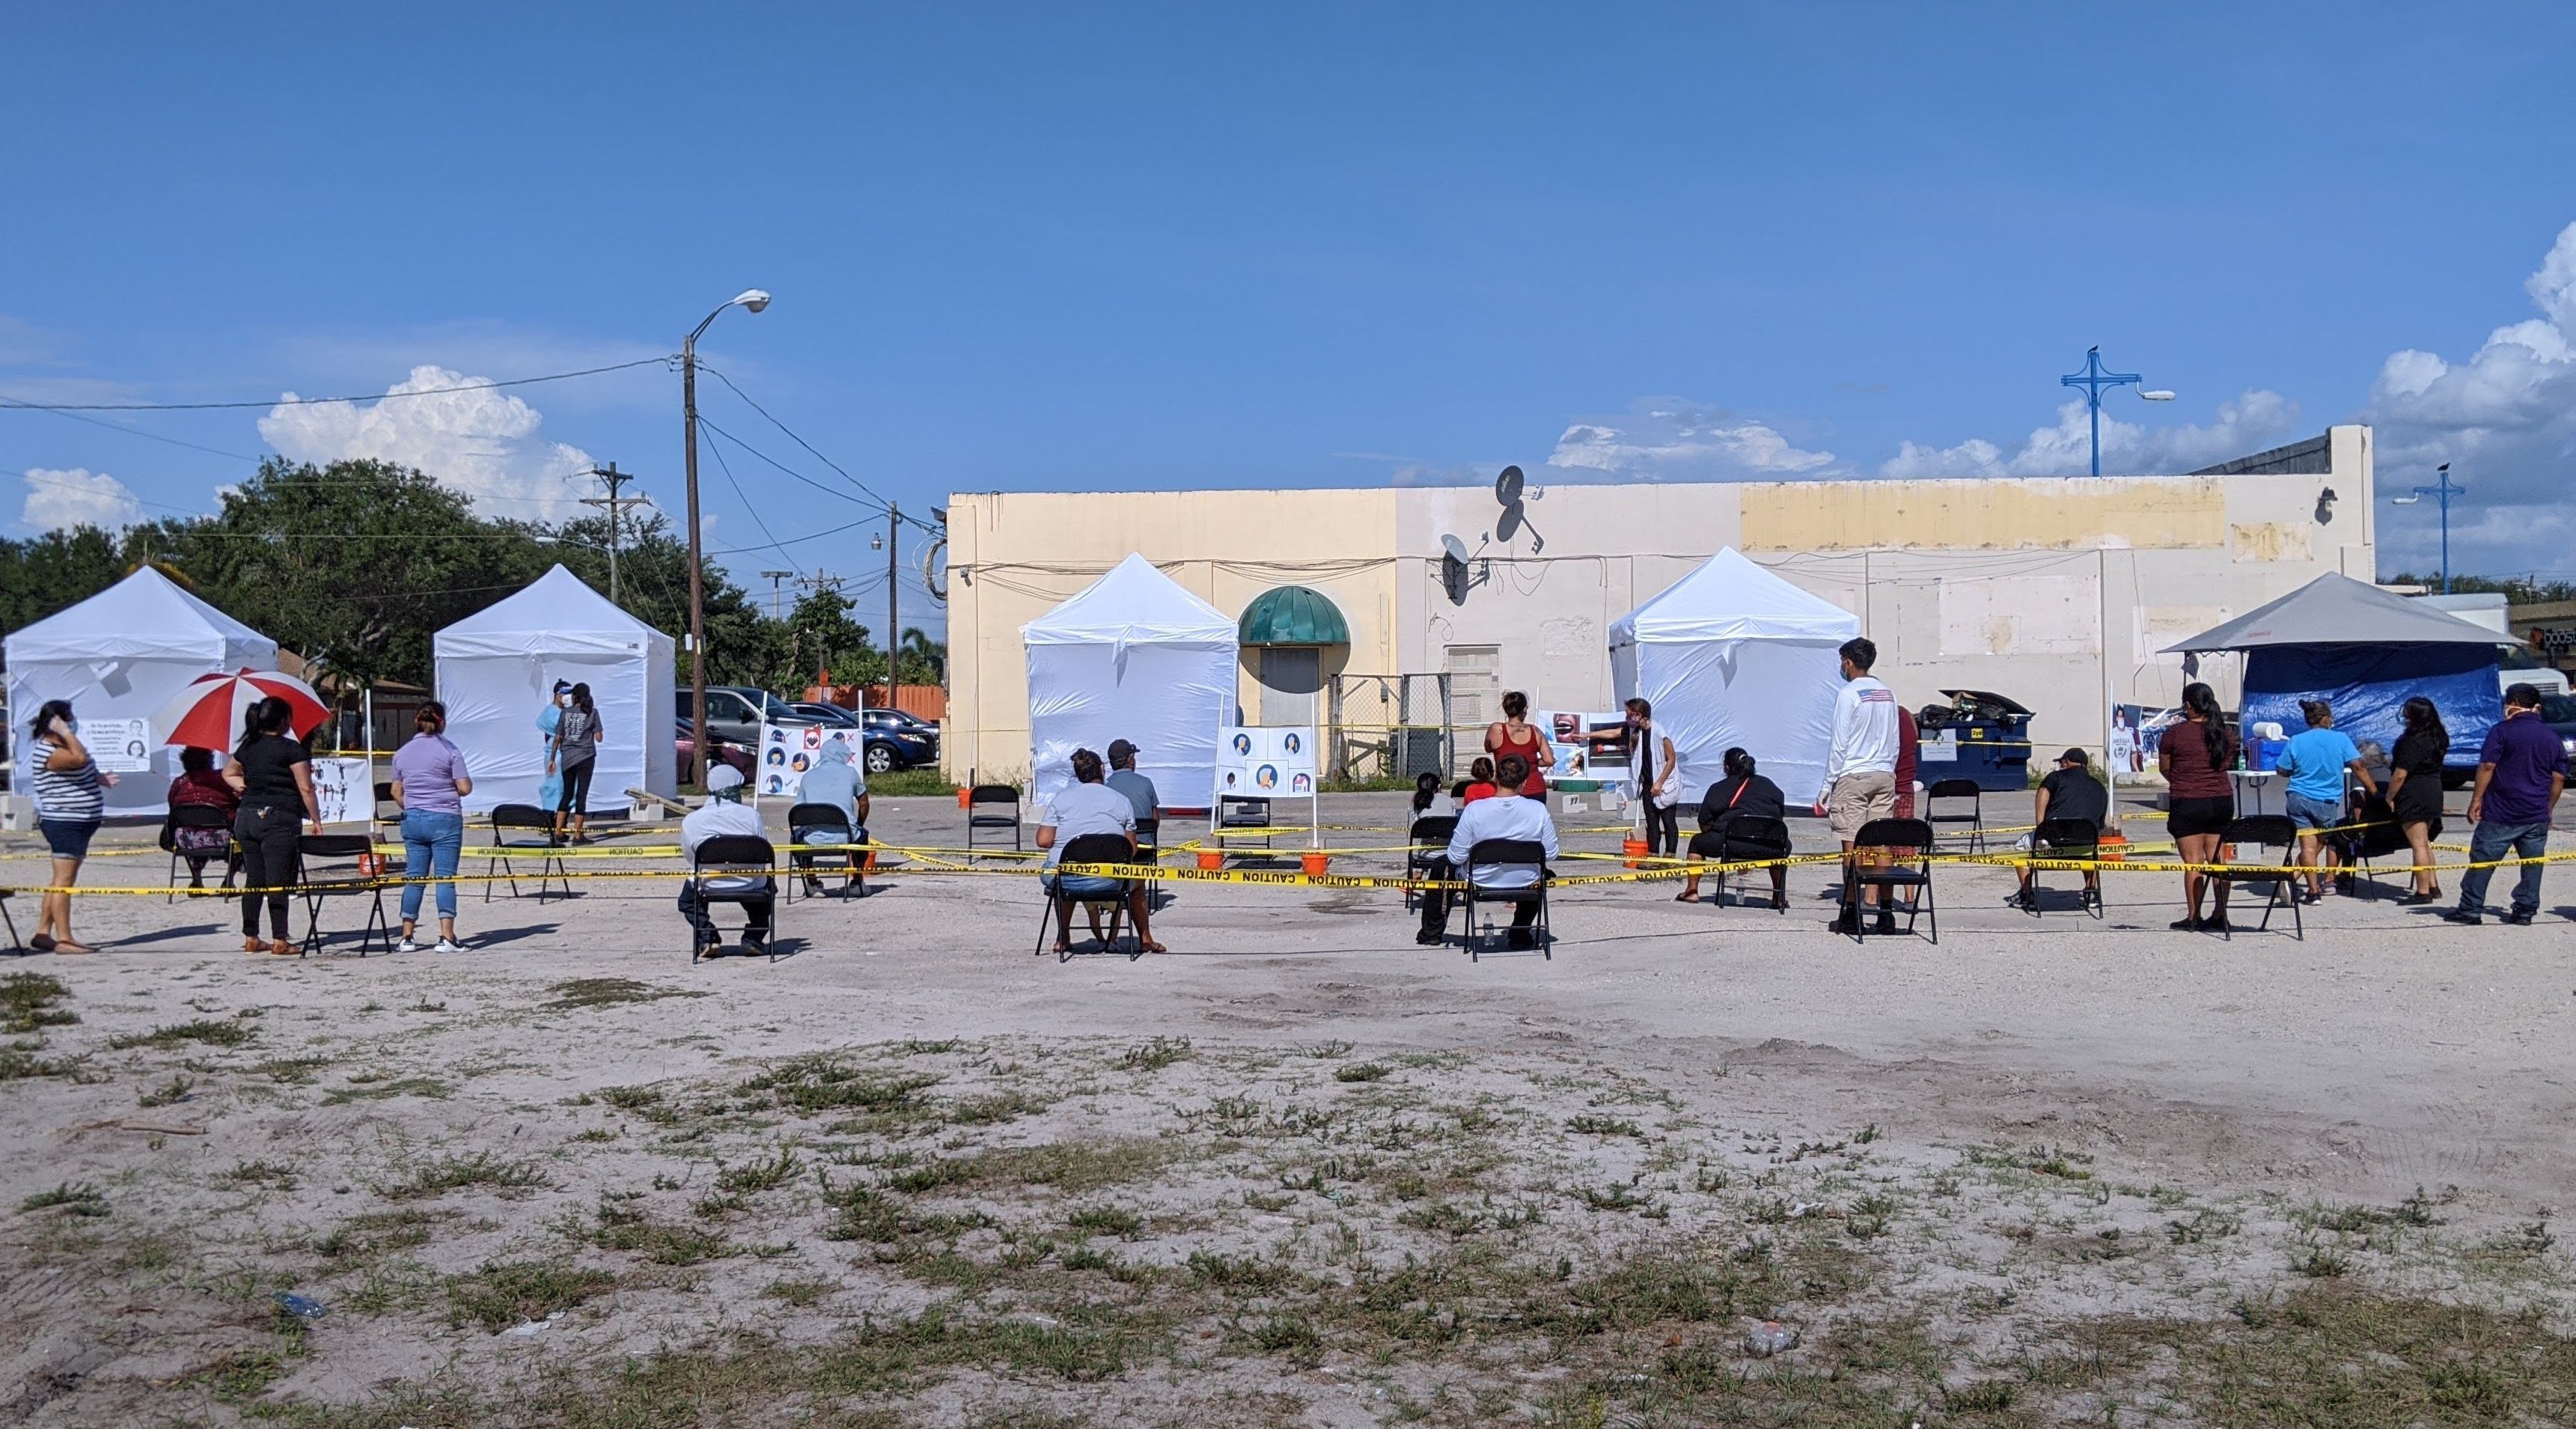 Testing and telemedicine mobile clinics in Immokalee, Florida. MSF was initially providing advice remotely before sending a team to Immokalee in April as the situation there worsened. 